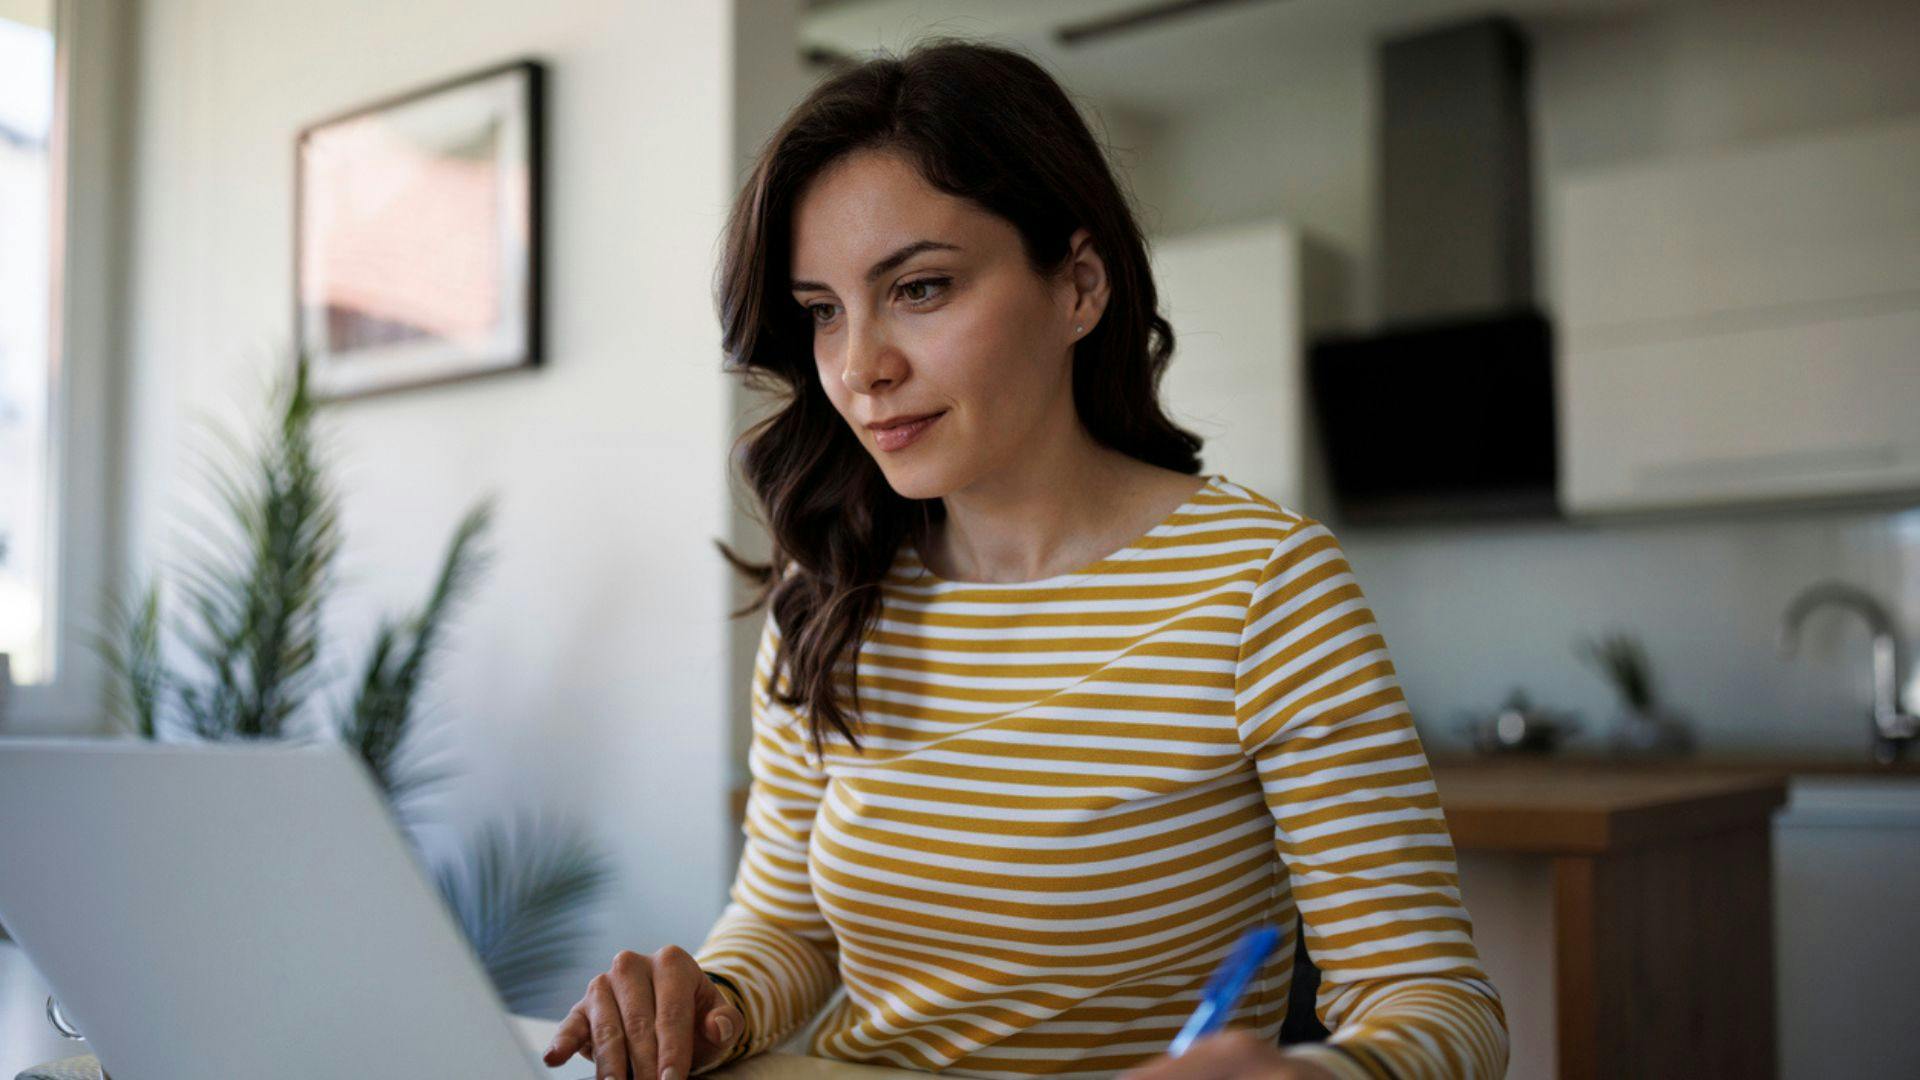 Woman in striped shirt typing on laptop.